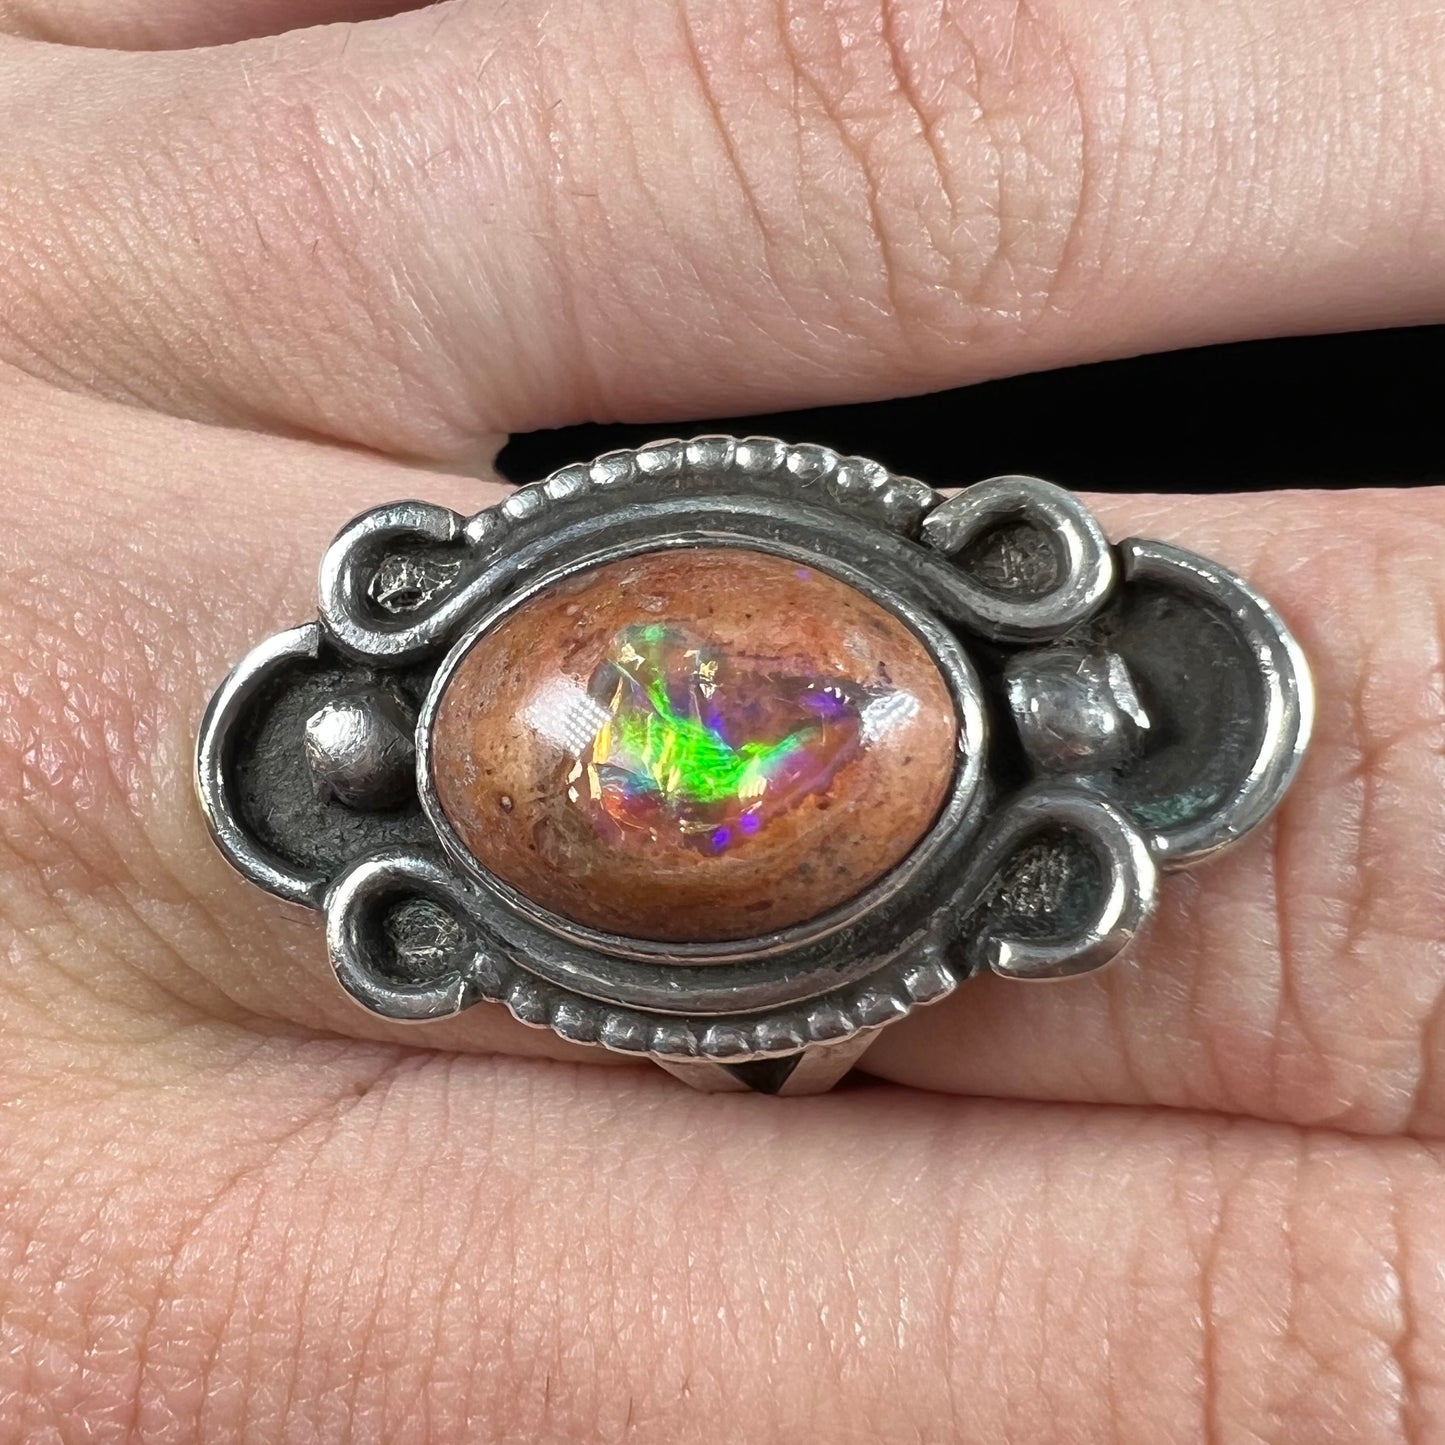 A vintage, Navajo style sterling silver ring set with an oval cabochon cut cantera fire opal stone.